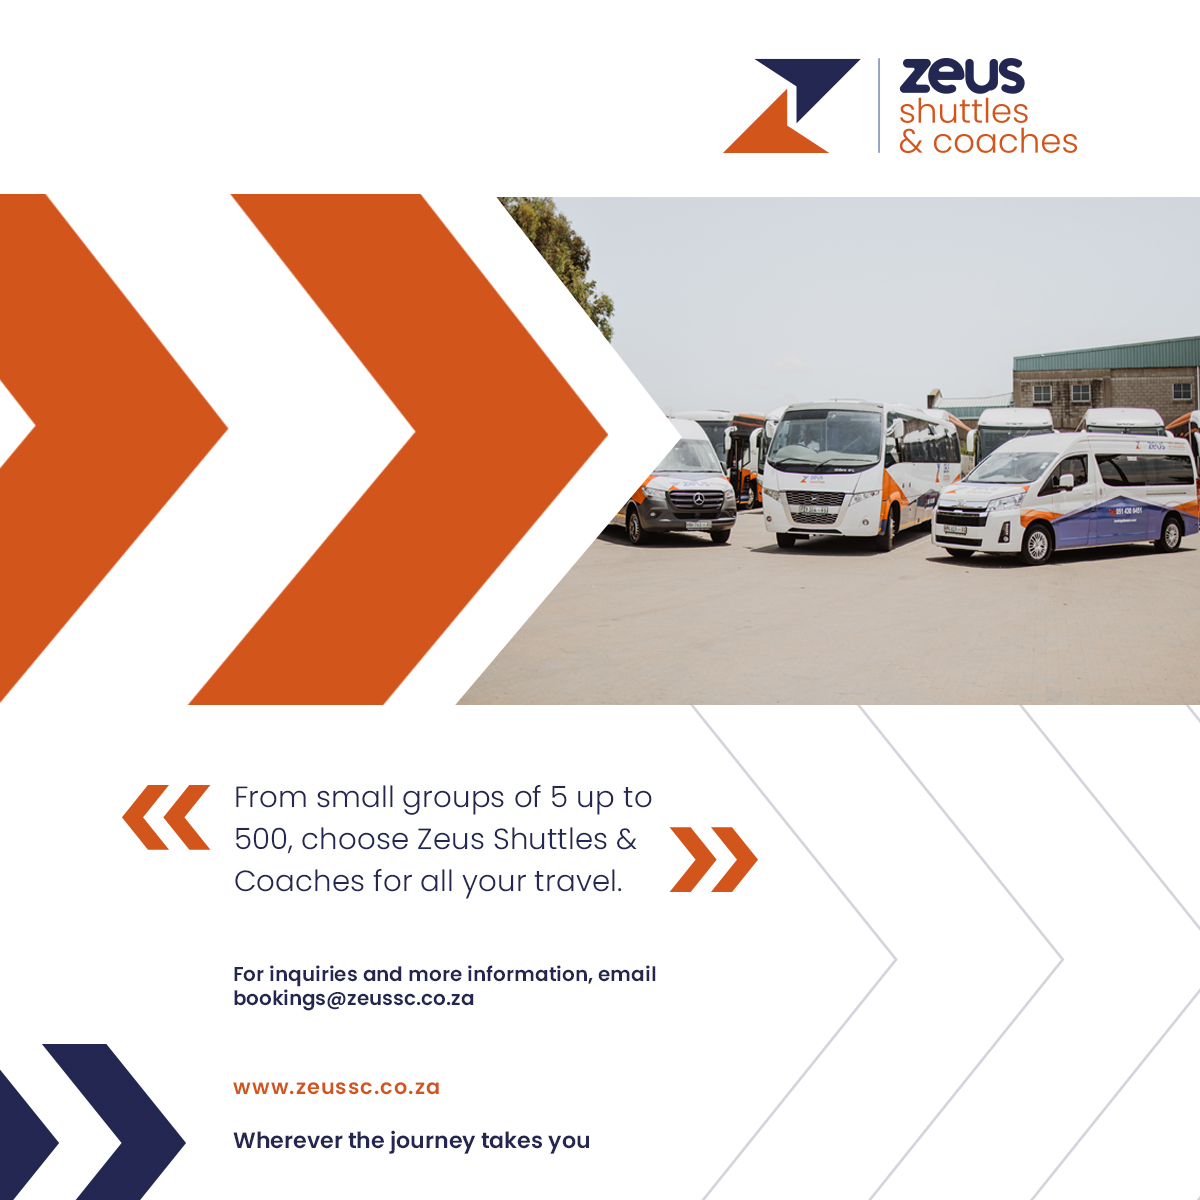 You can count on Zeus Shuttles & Coaches for all your transportation needs, from school trips to work transport or functions. 
For enquiries contact Bookings@zeussc.co.za
#transportation #shuttleservice #shuttlebus #travelcoach #traveling  #longdistancetravel